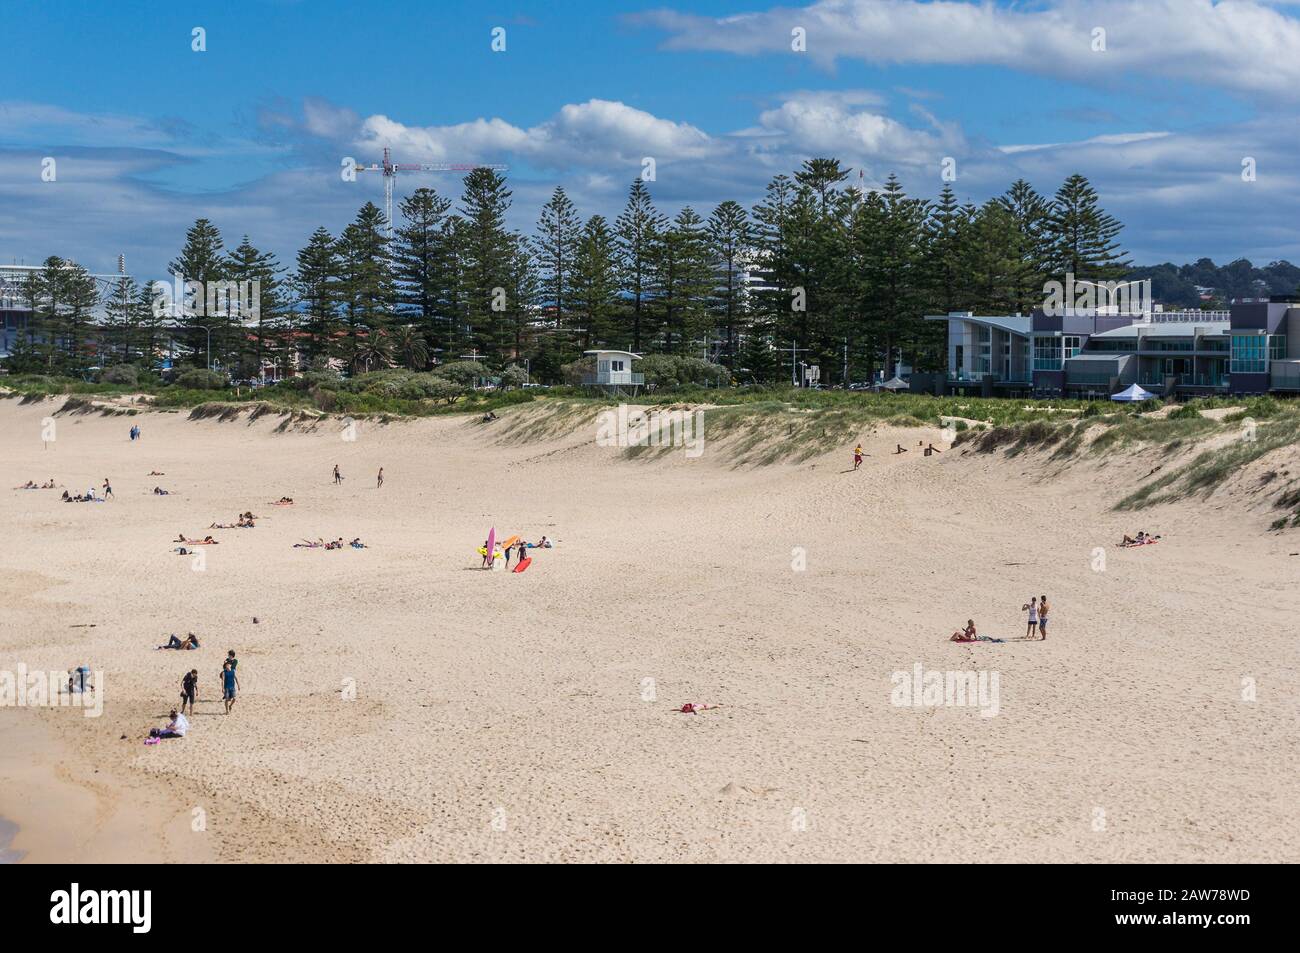 Travel background of picturesque sandy beach with incidental people. Happy vacation lifestyle, tourism landscape. Wollongong, Australia Stock Photo